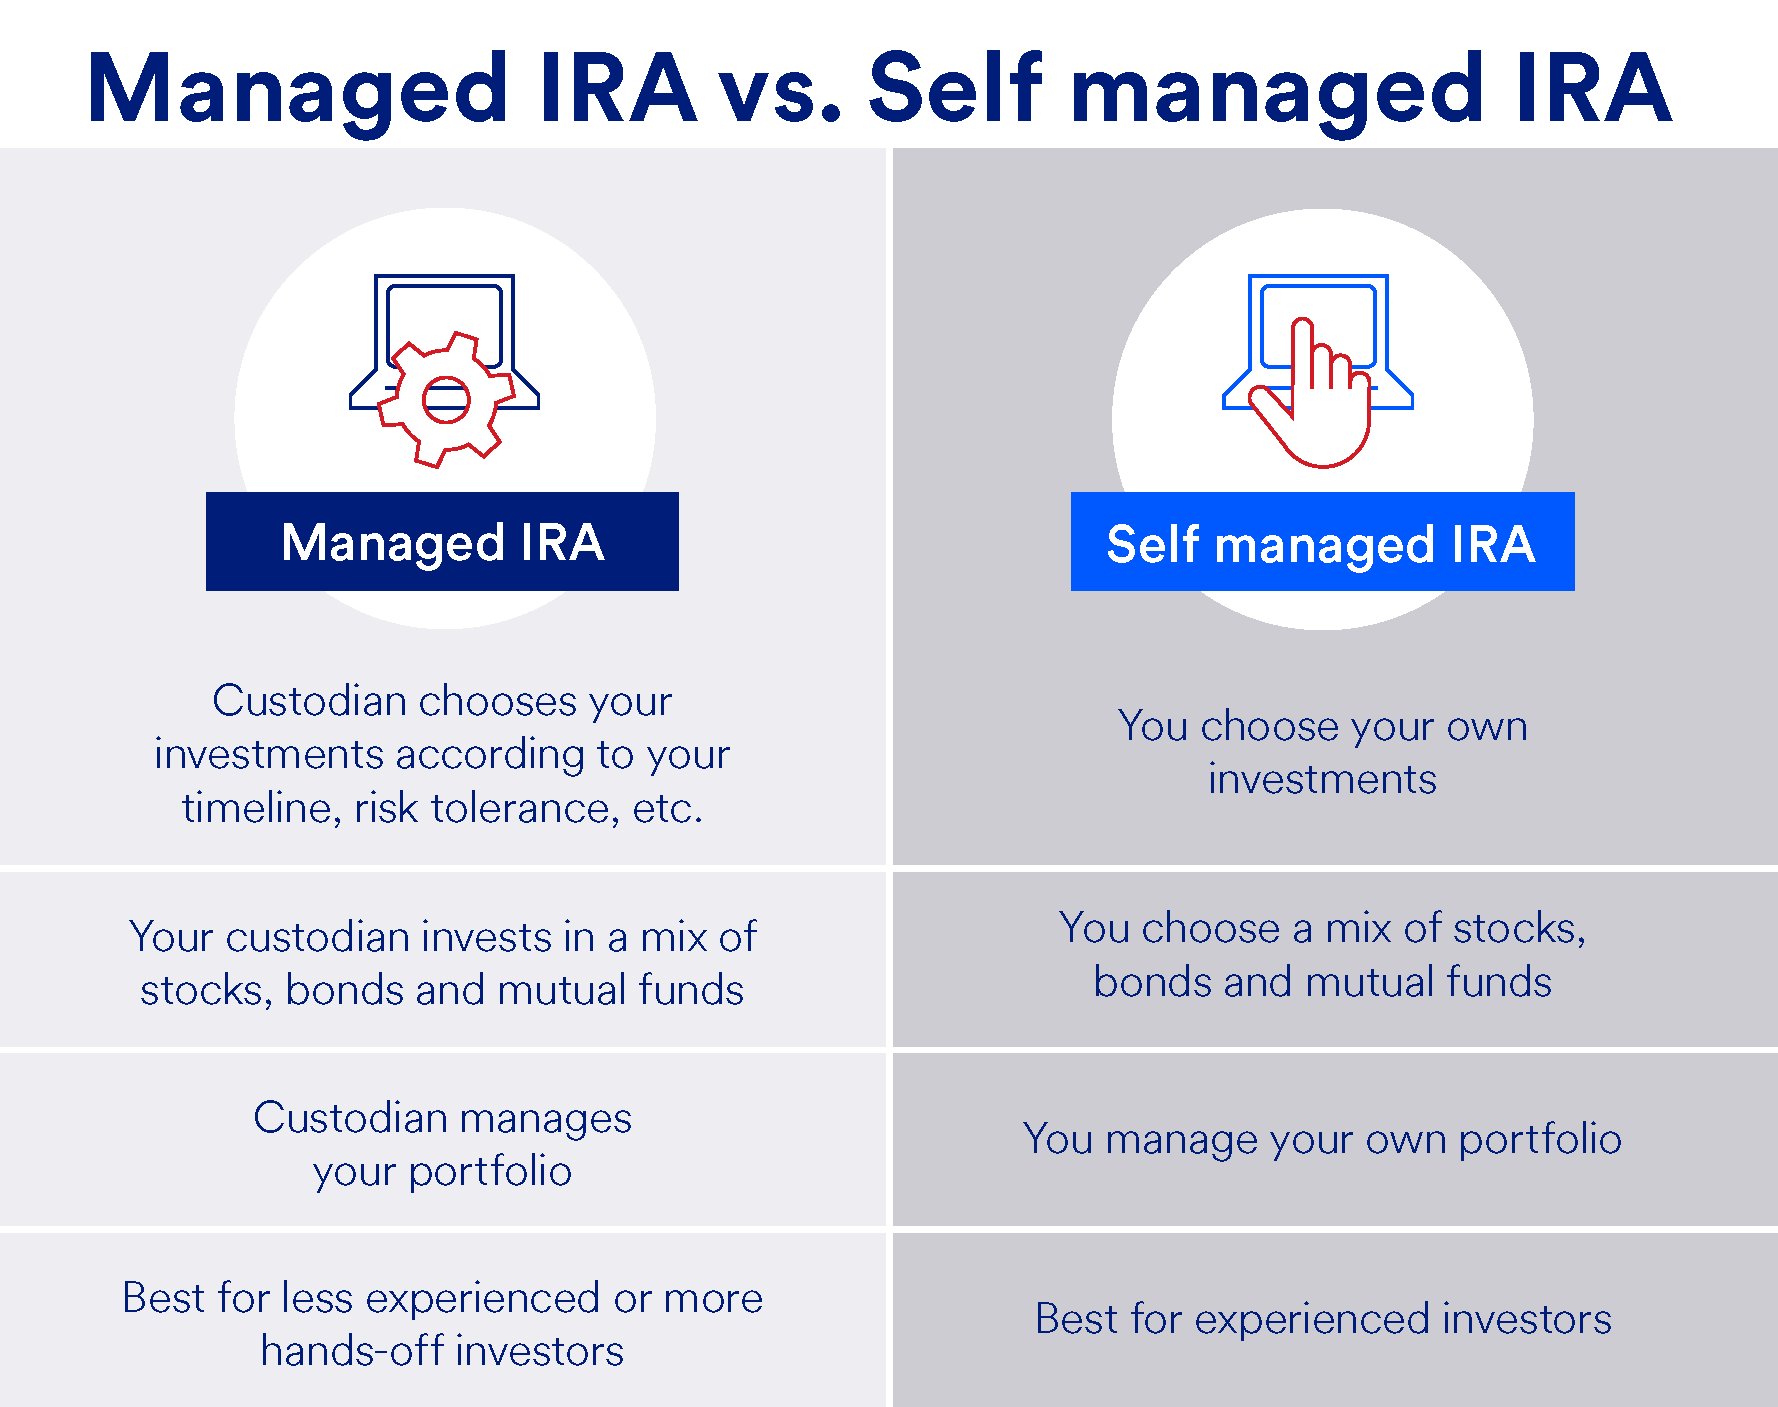 A managed IRA is different than a self managed IRA in that a custodian chooses your investments and manages your portfolio, which may be more appropriate for less experienced or hands-off investors. A self managed IRA, in which you choose your own investments and manage your portfolio, may be better for more experienced investors.